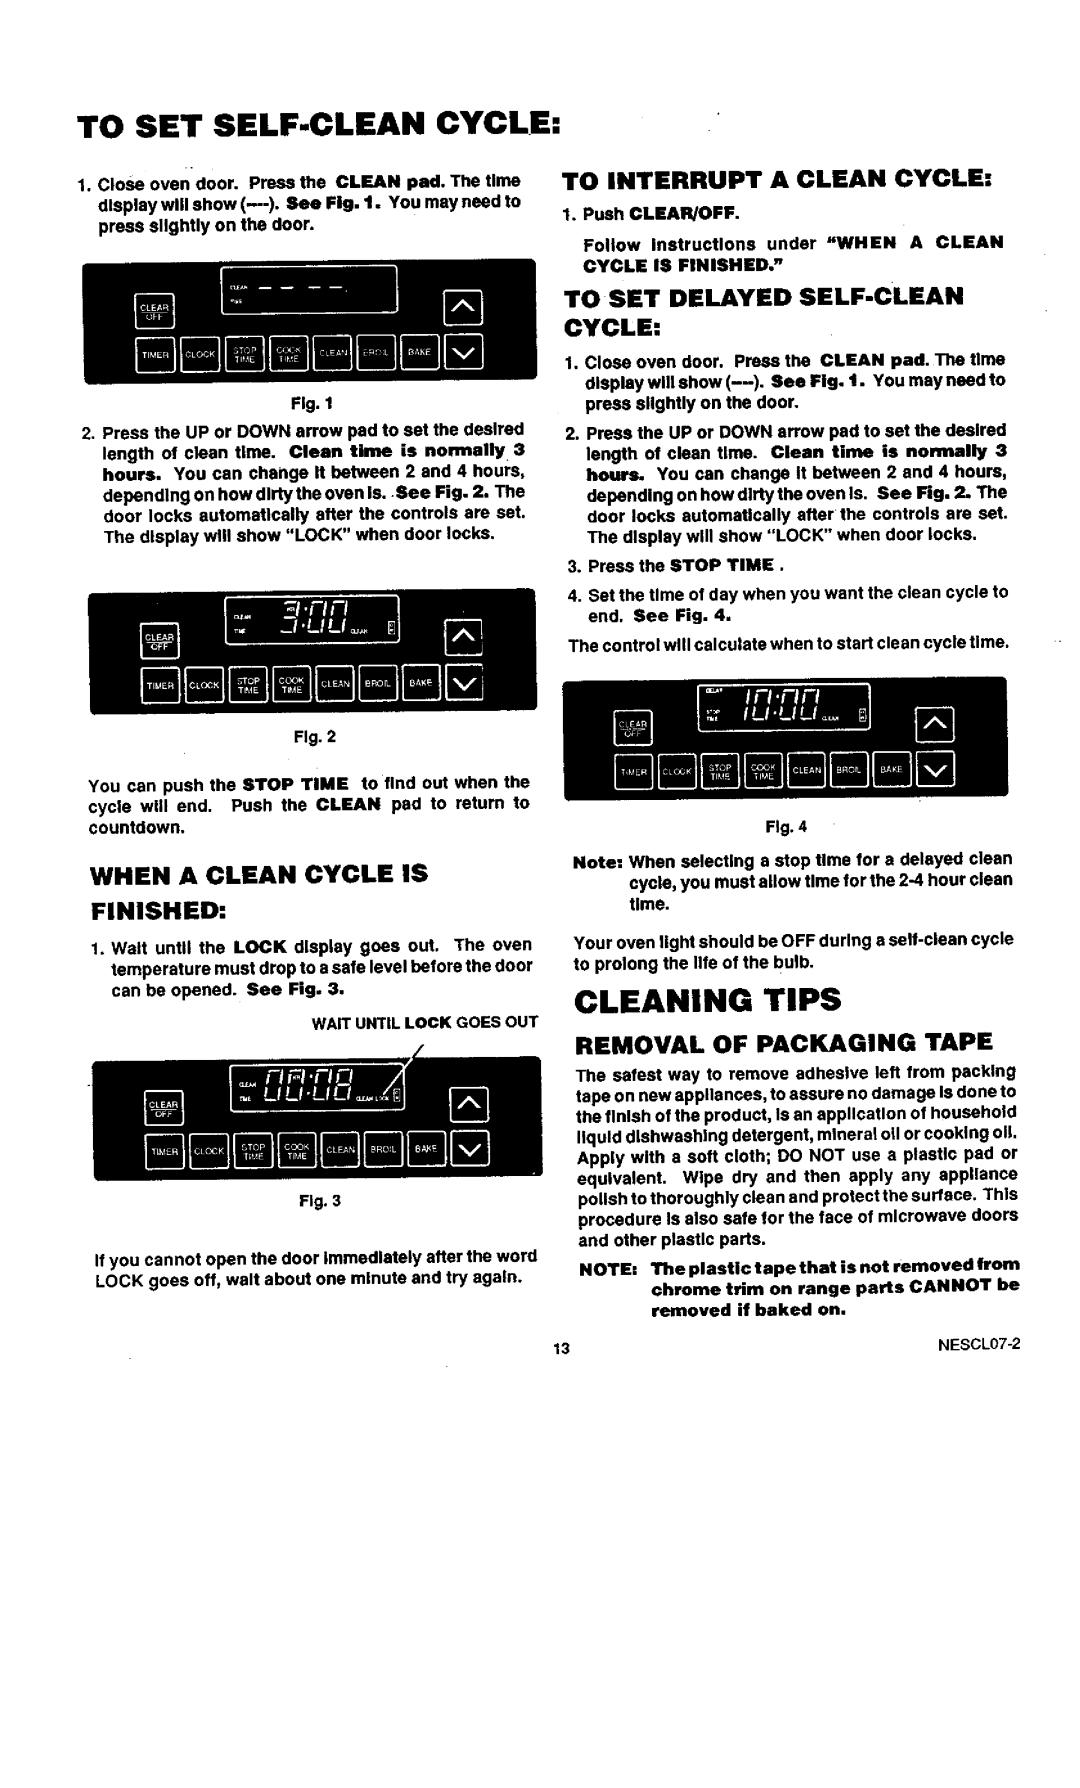 Sears 45521 To Set Self-Clean, Cycle, Cleaning Tips, pad. The time TO INTERRUPT A CLEAN CYCLE, Removal Of Packaging Tape 